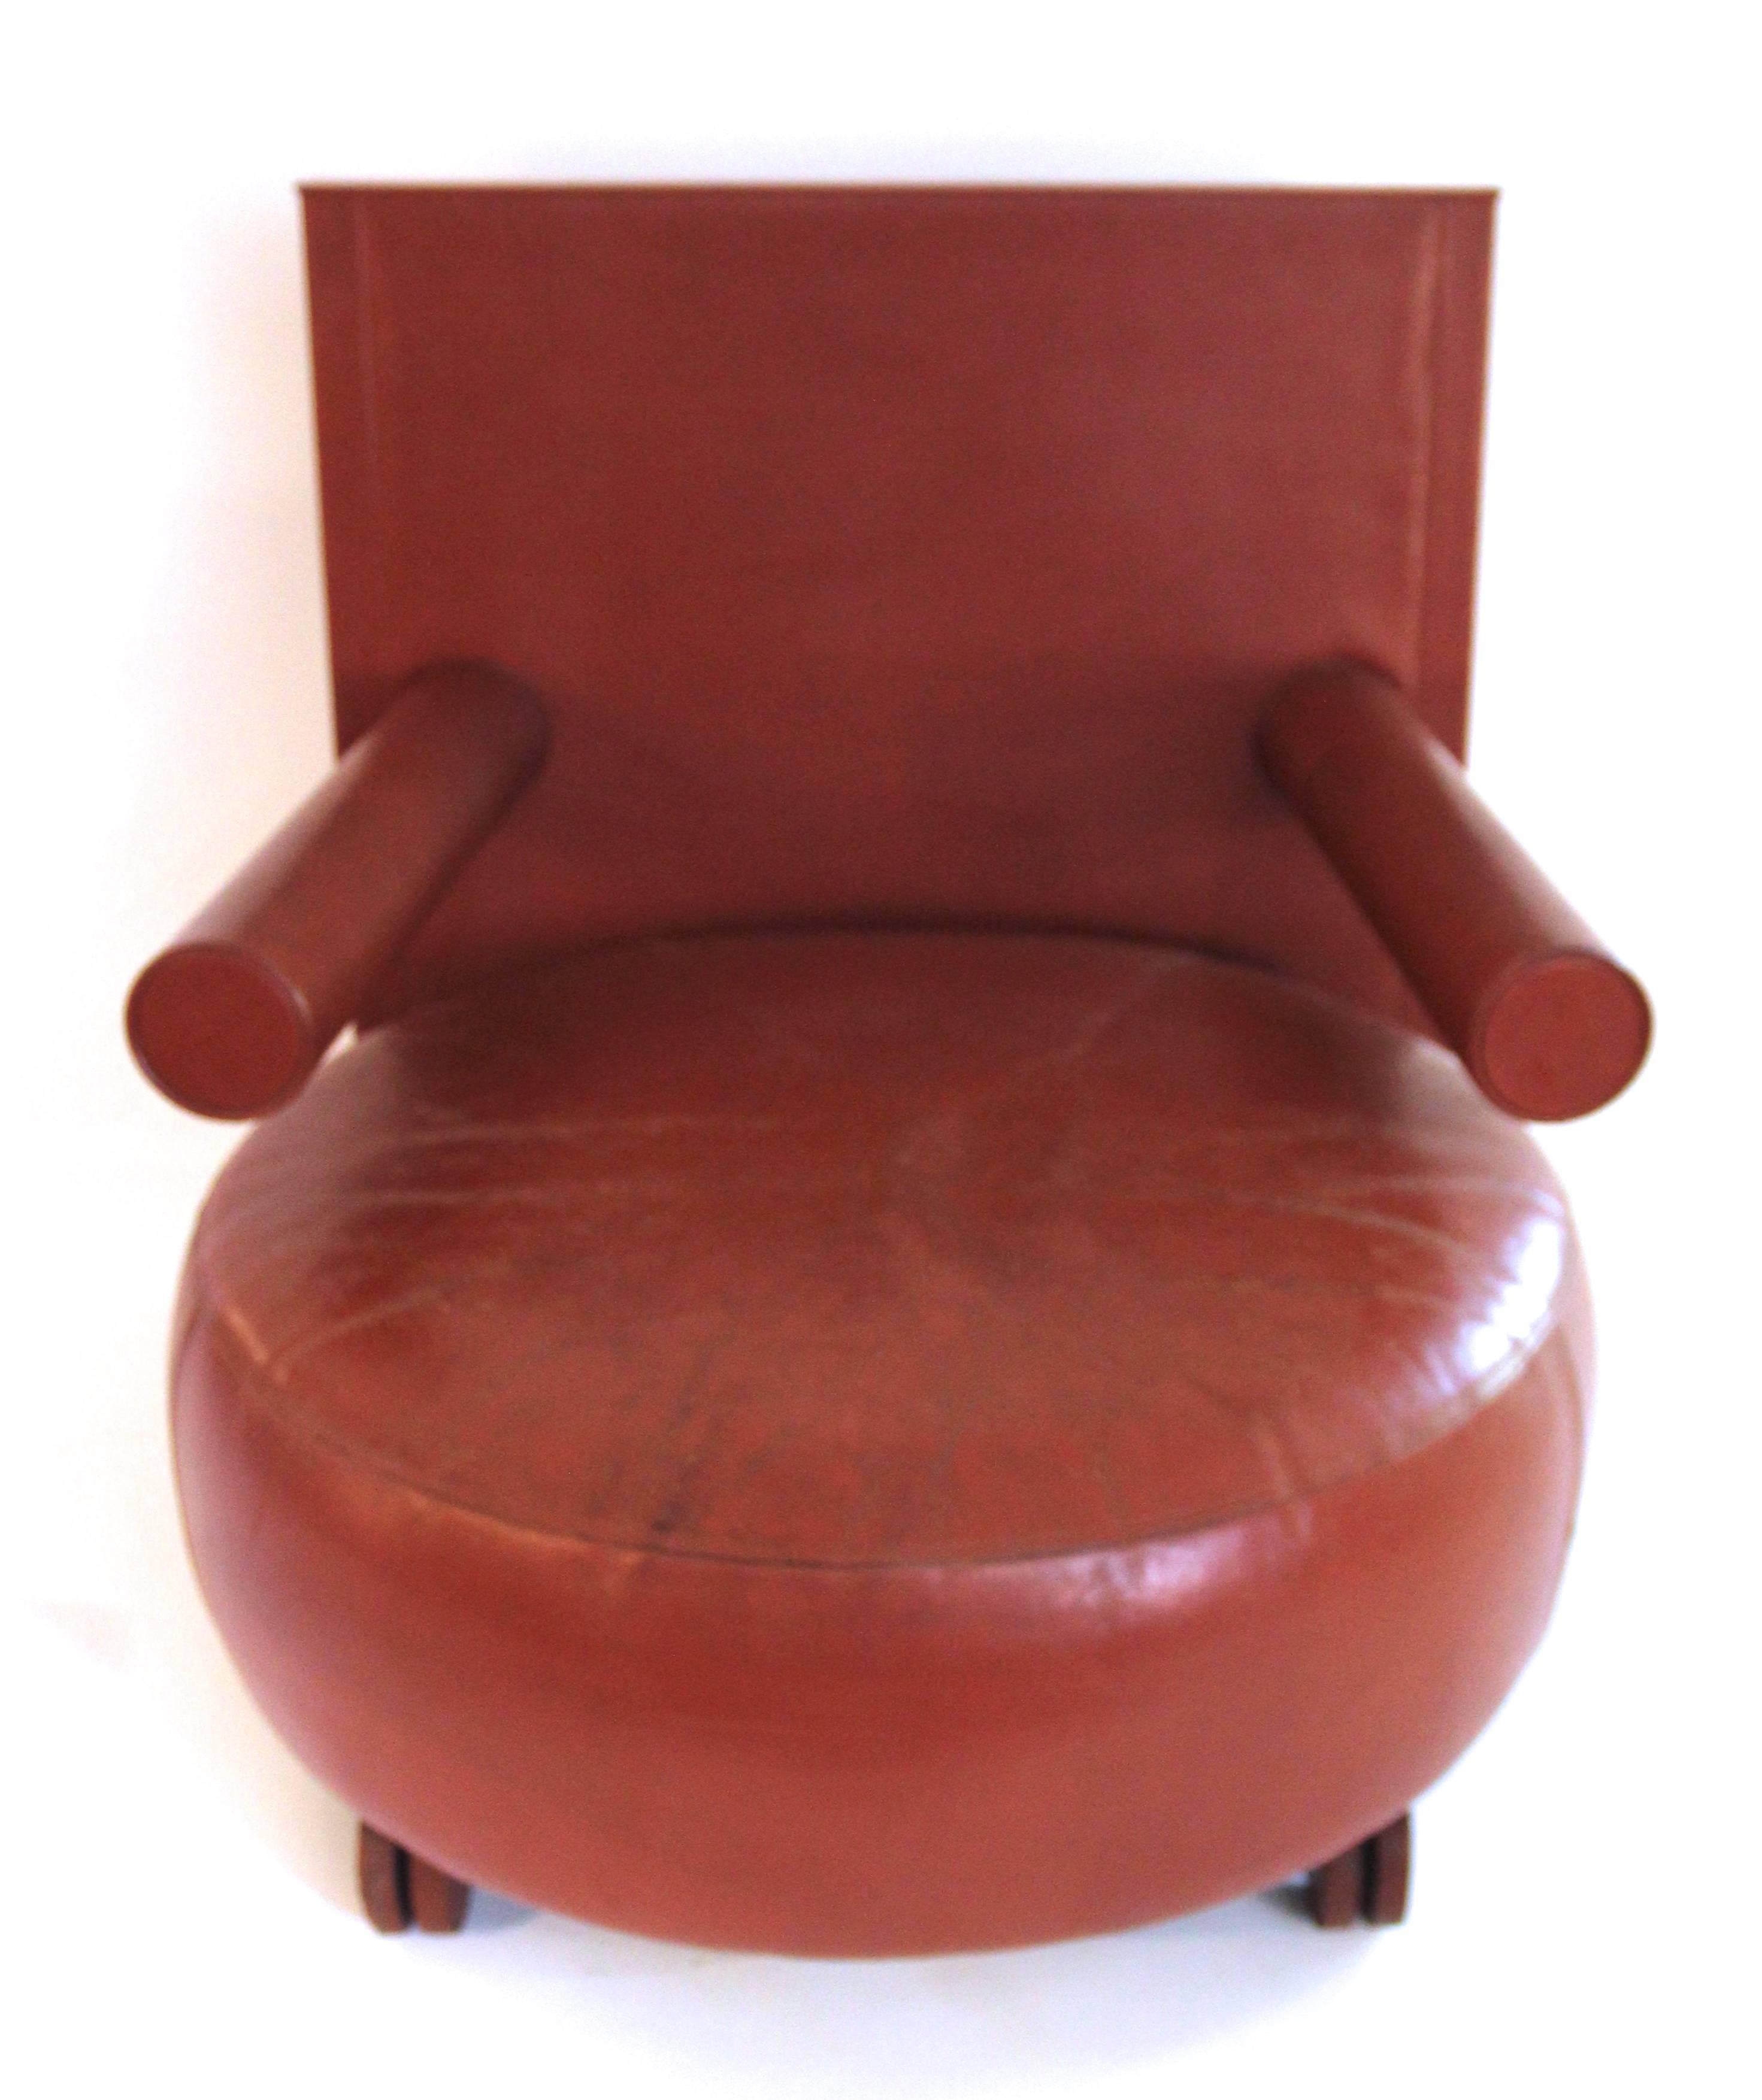 Antonio Citterio,
Pair of armchairs,
Baisity model for BB Italia,
Original leather and caster legs in lacquered metal,
circa 1985, Italy.
Wear consistent with age and use.
Measures: Height 81 cm, seat height 40 cm, Width 84 cm, depth 95 cm.